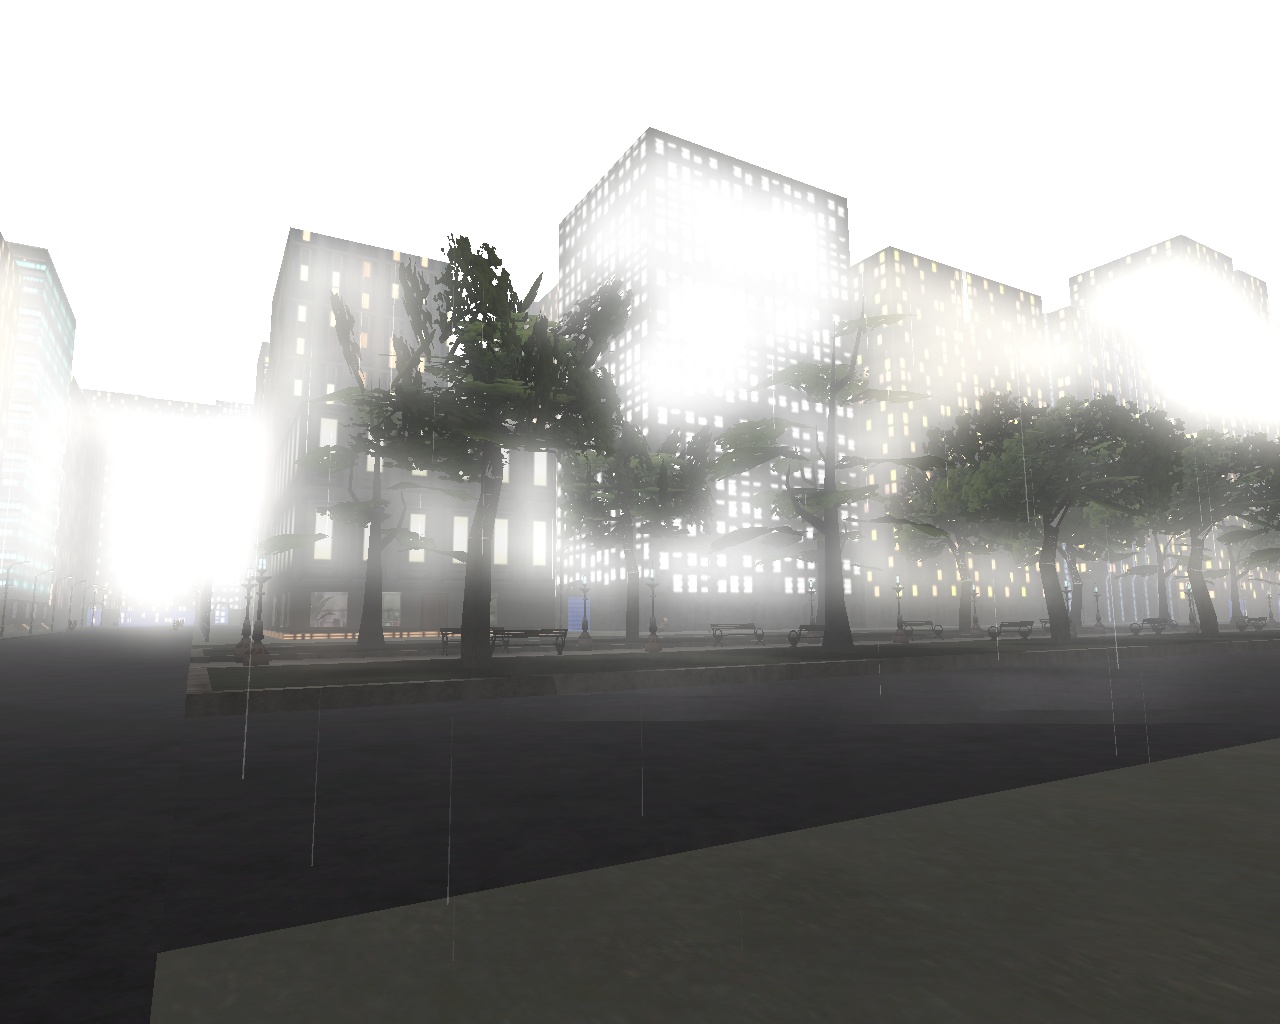 More information about "The City Crossroads - Mist Version"